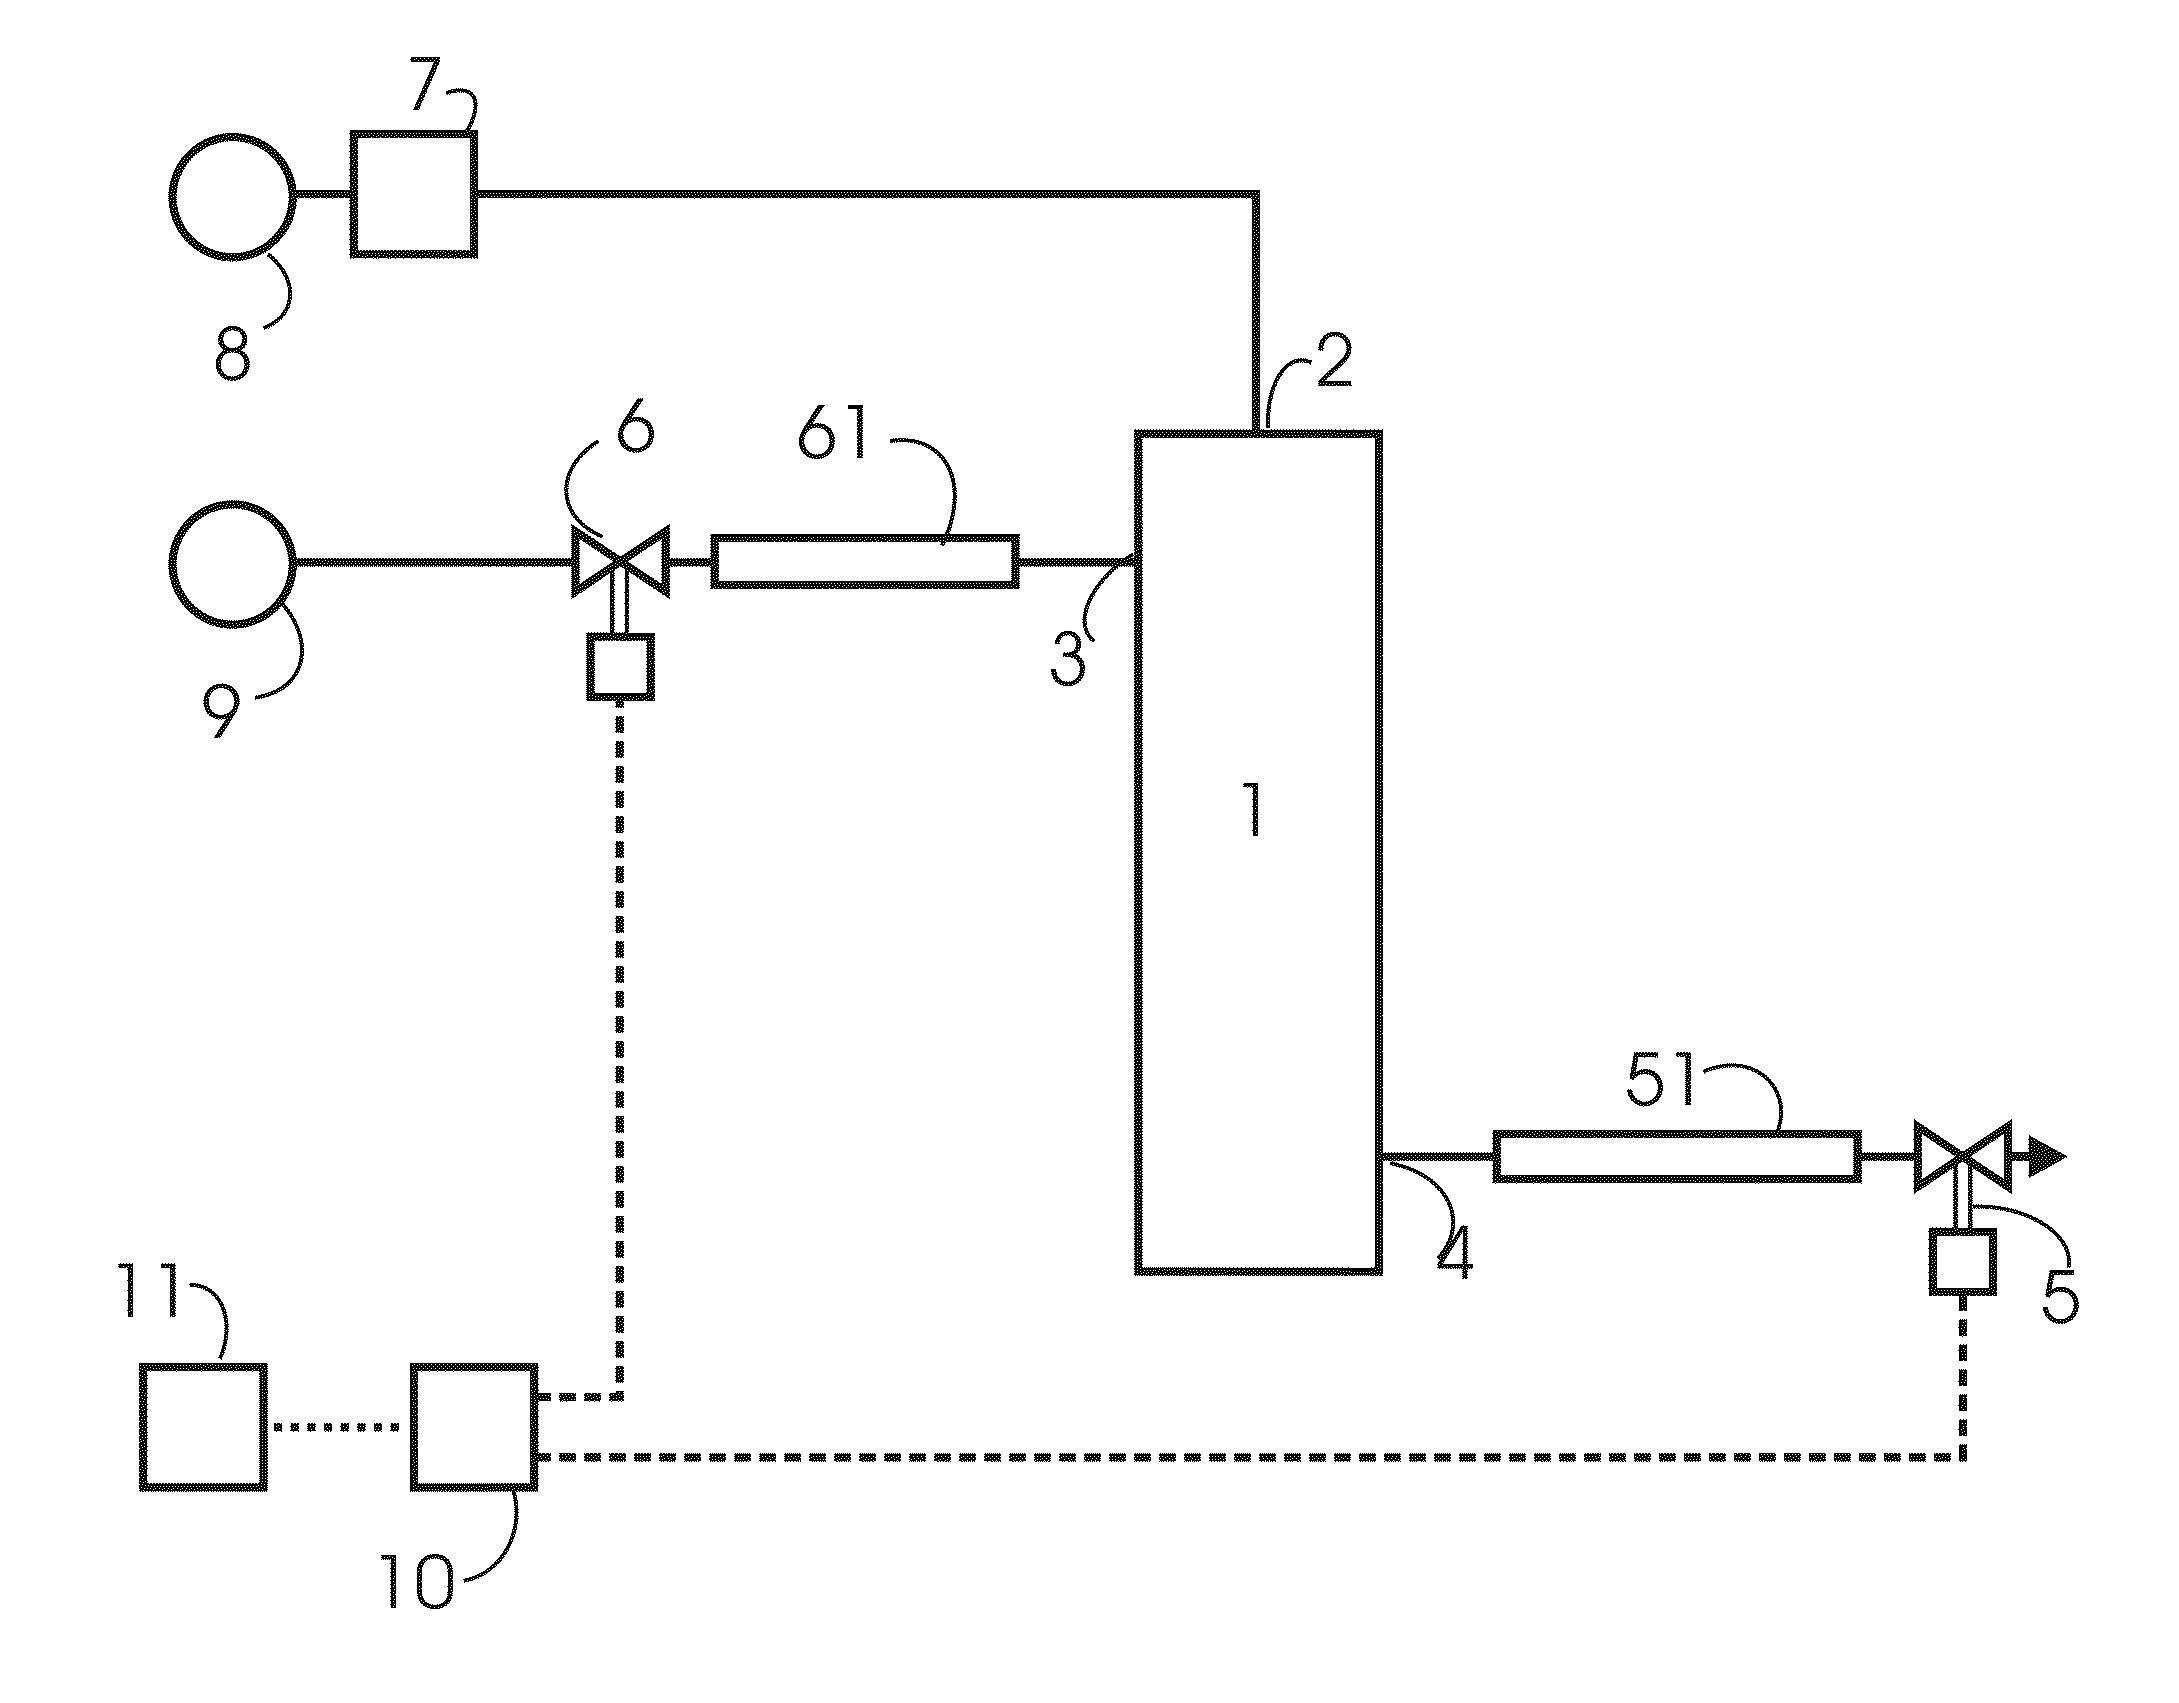 Producing or dispensing liquid products